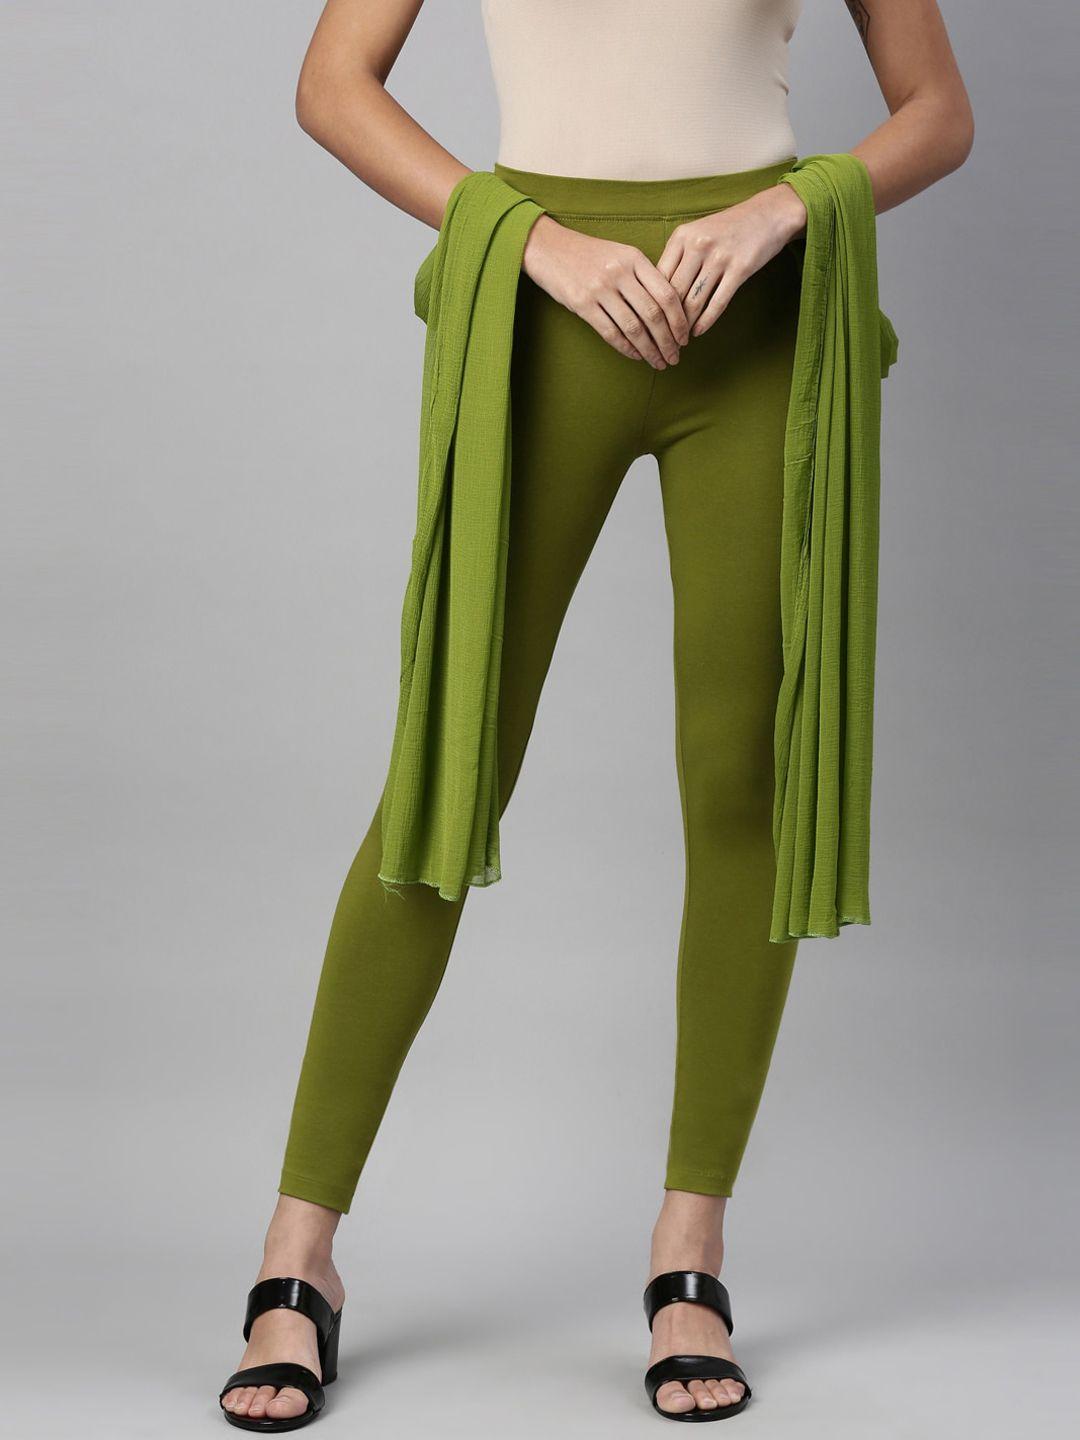 twin birds women olive-green solid ankle length leggings & shawl